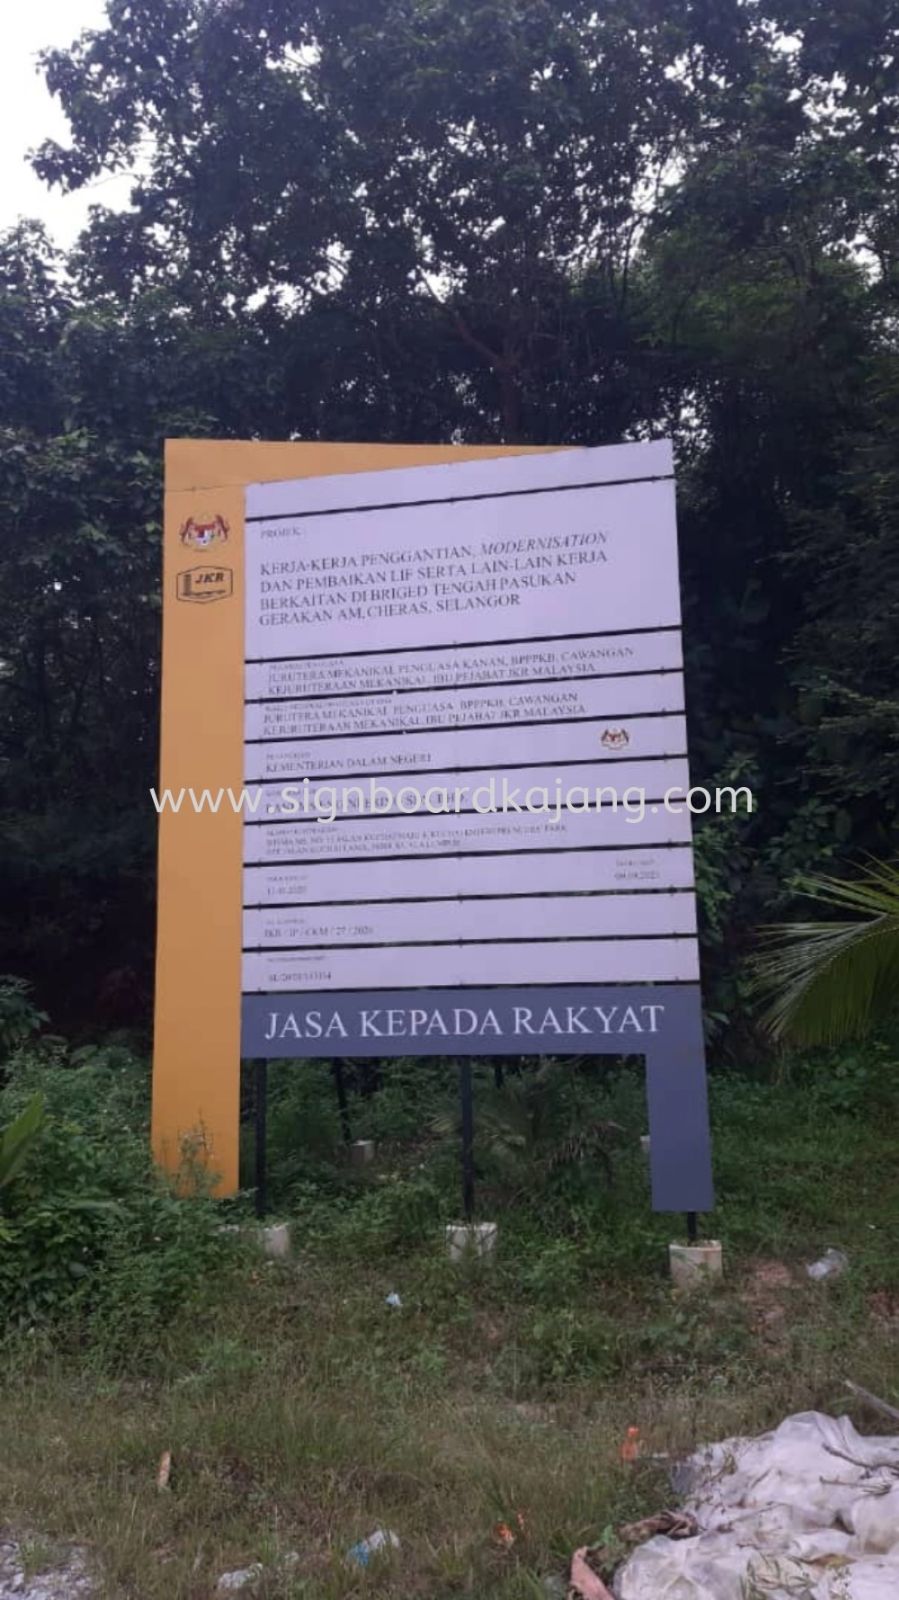 WHAT IS THE FUNCTION OF PROJECT SIGNBOARD?